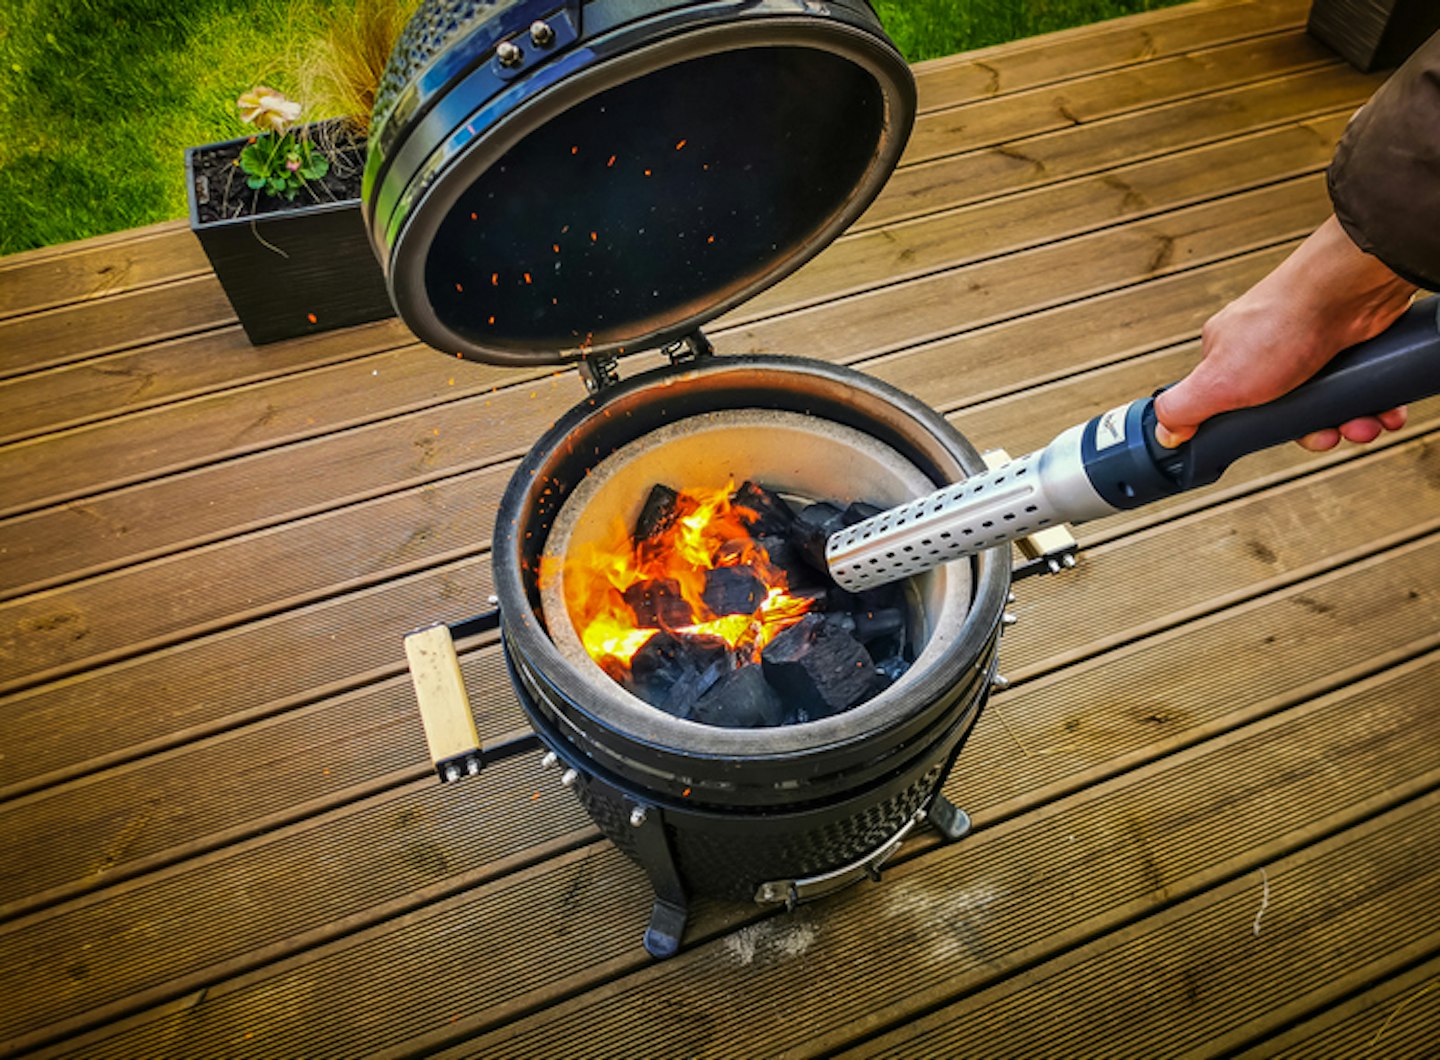 Lighting a Kamado type barbecue grill with an electrical charcoal